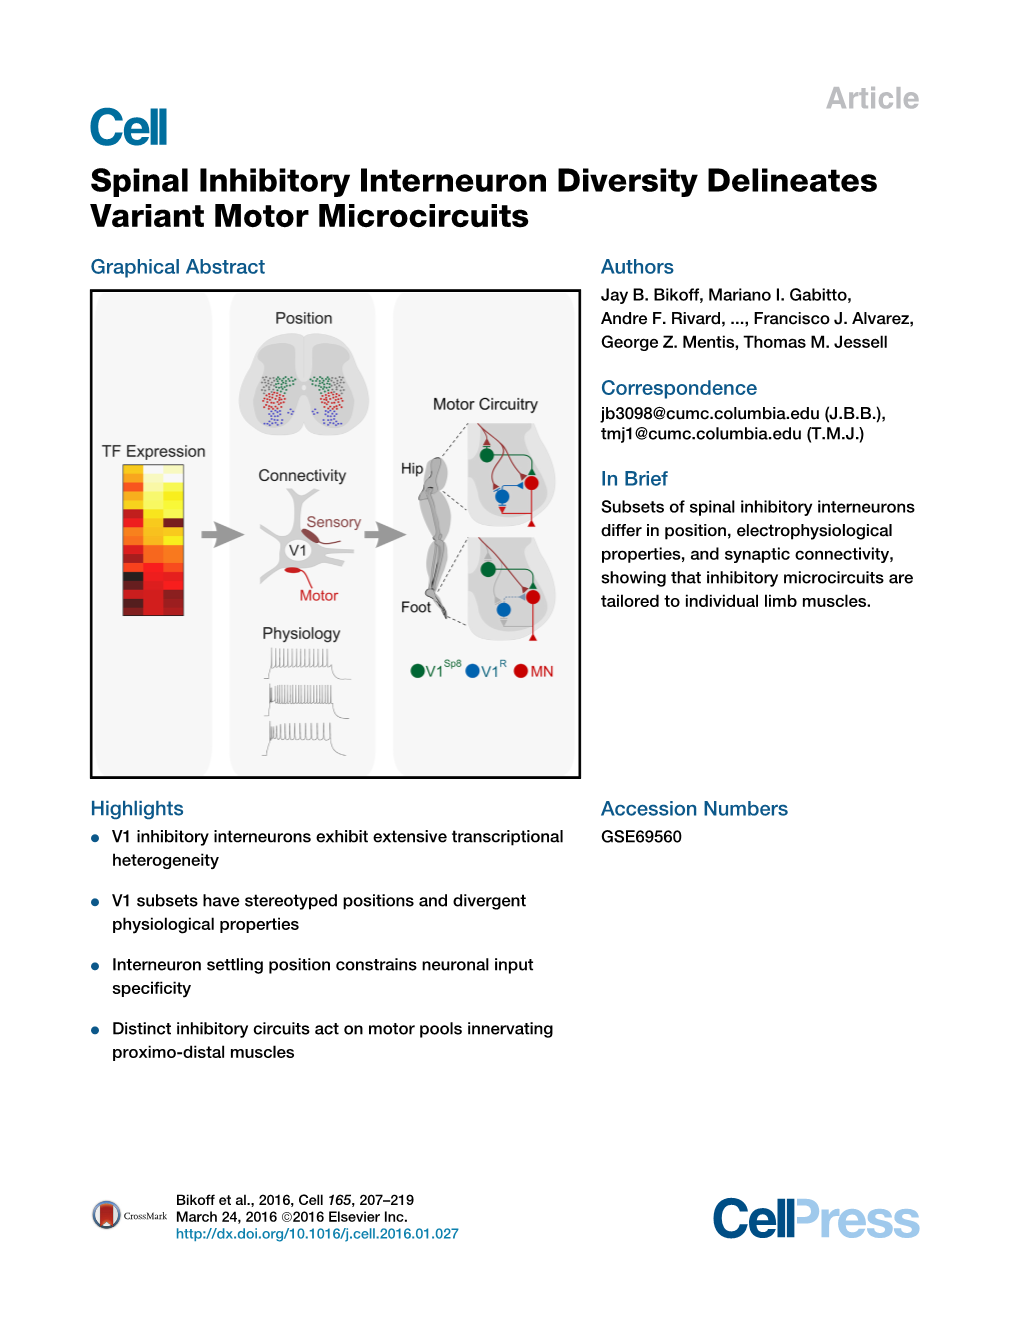 Spinal Inhibitory Interneuron Diversity Delineates Variant Motor Microcircuits